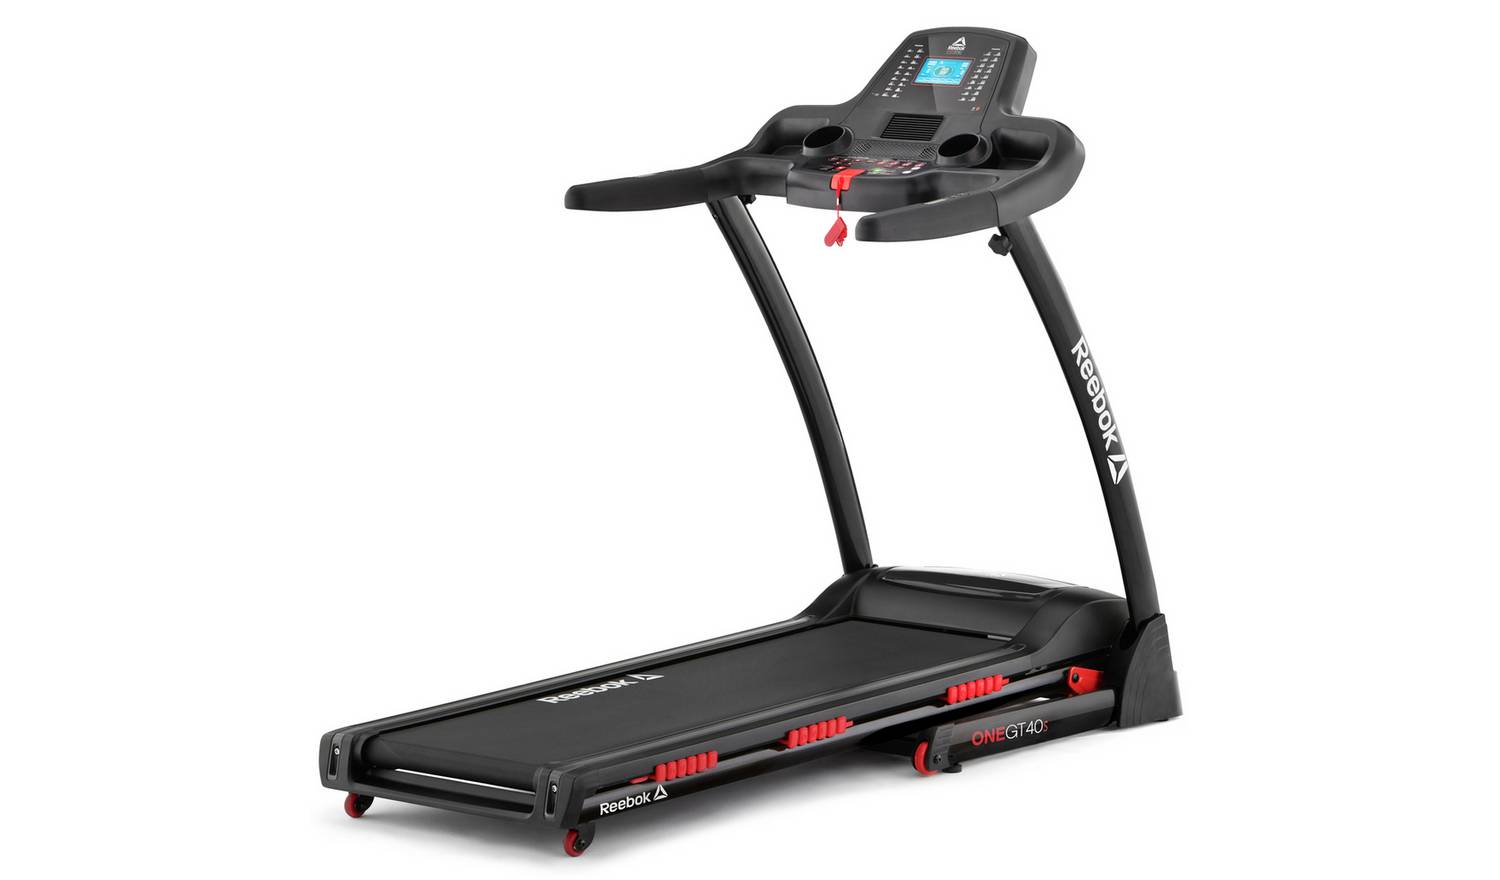 Reebok One GT40s Treadmill | Review 